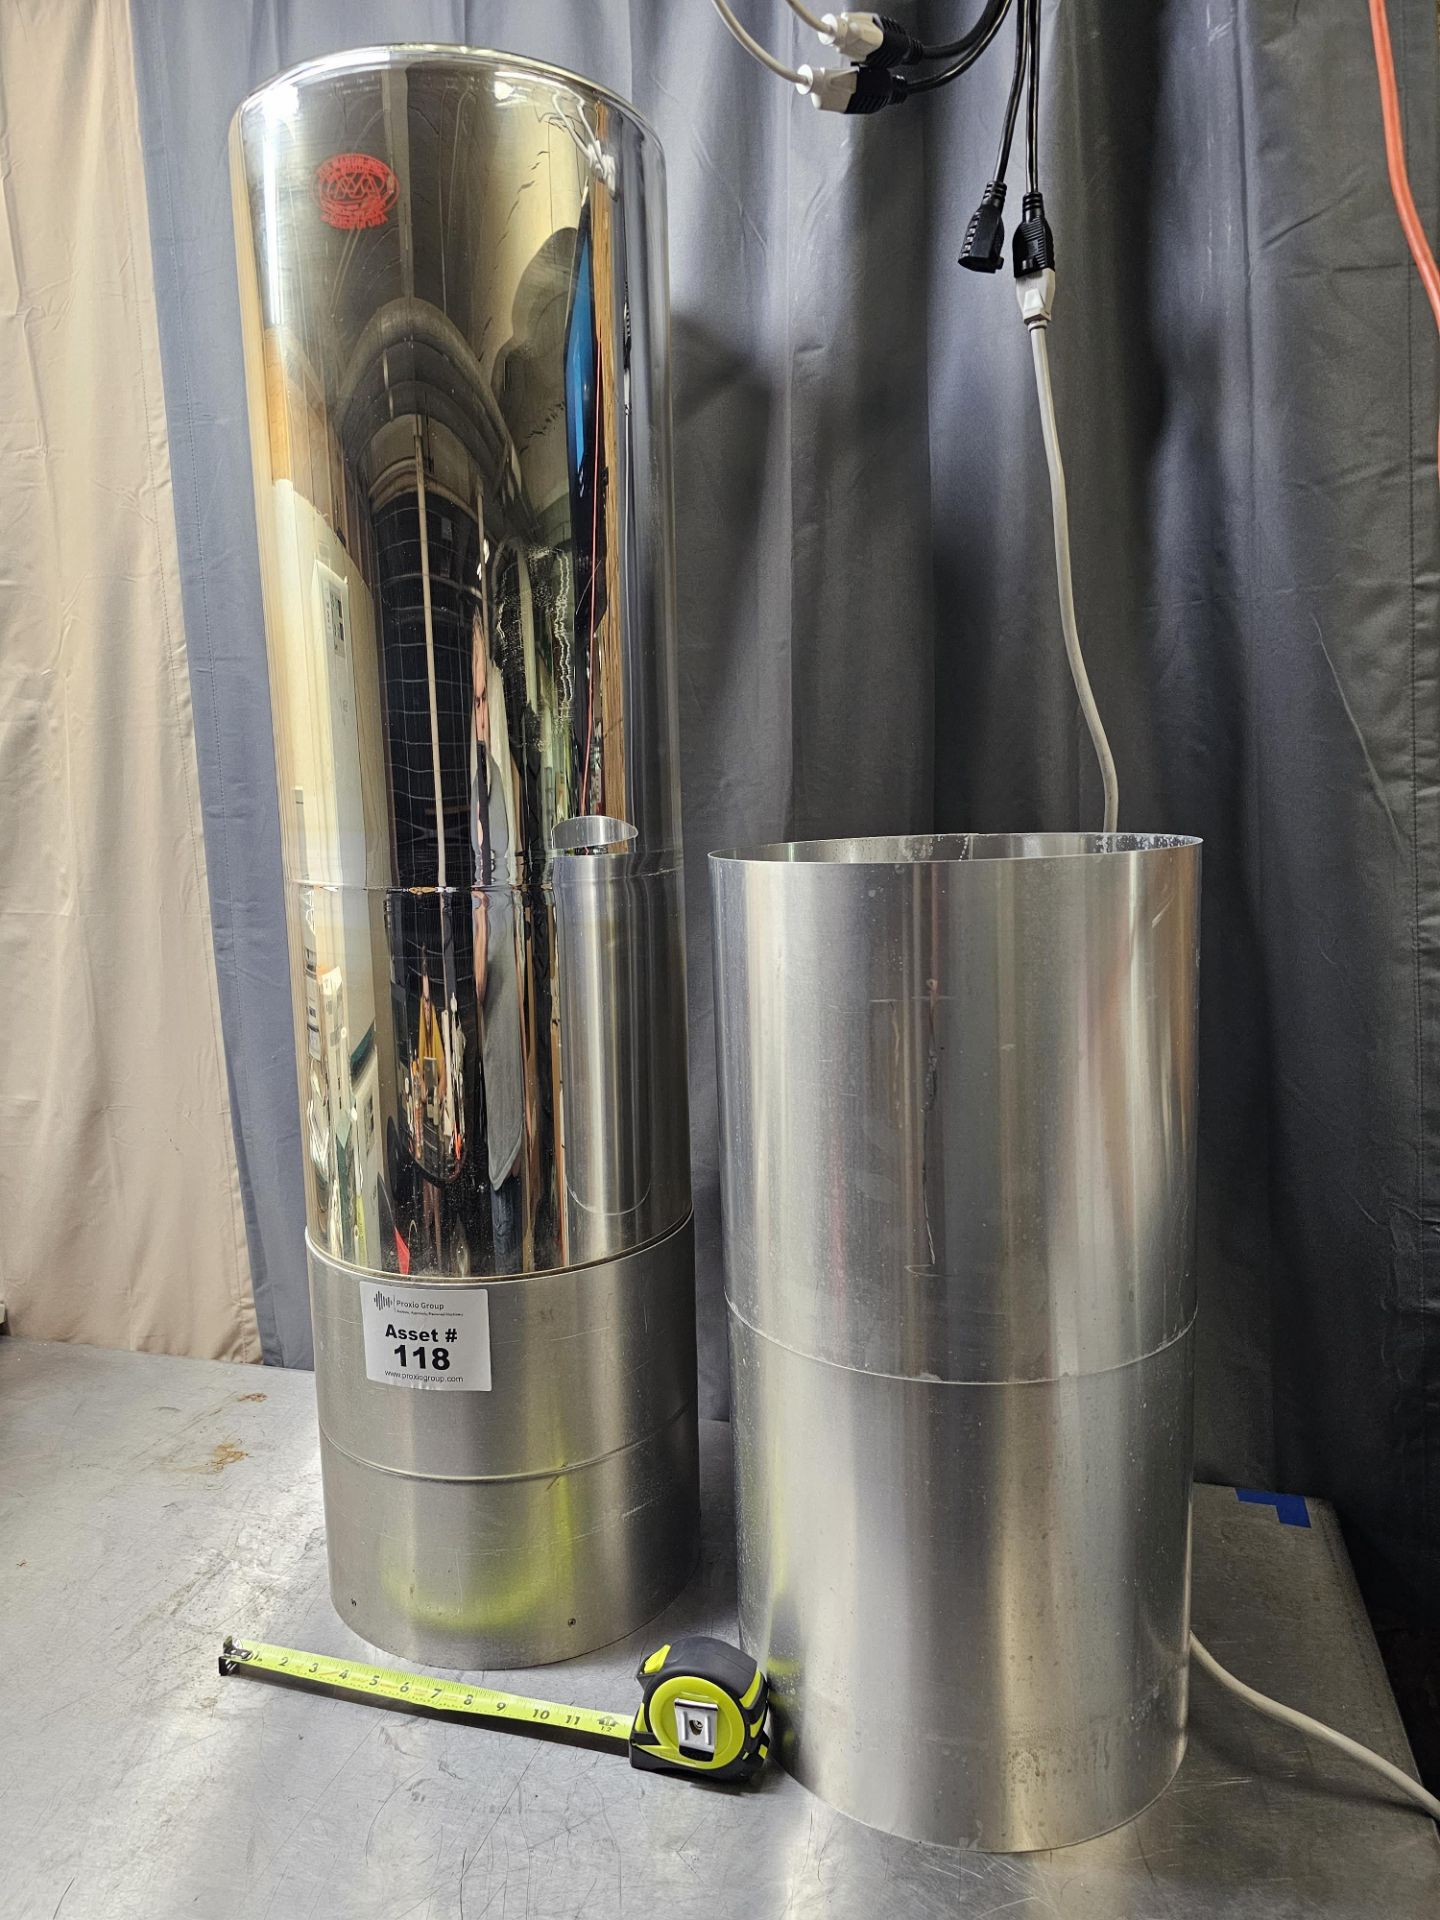 H.S.Martin 50L Silvered Glass Cryogenic Dewar Flask With Slide-on Protective Tubes Bldg Loc: Side - Image 3 of 5